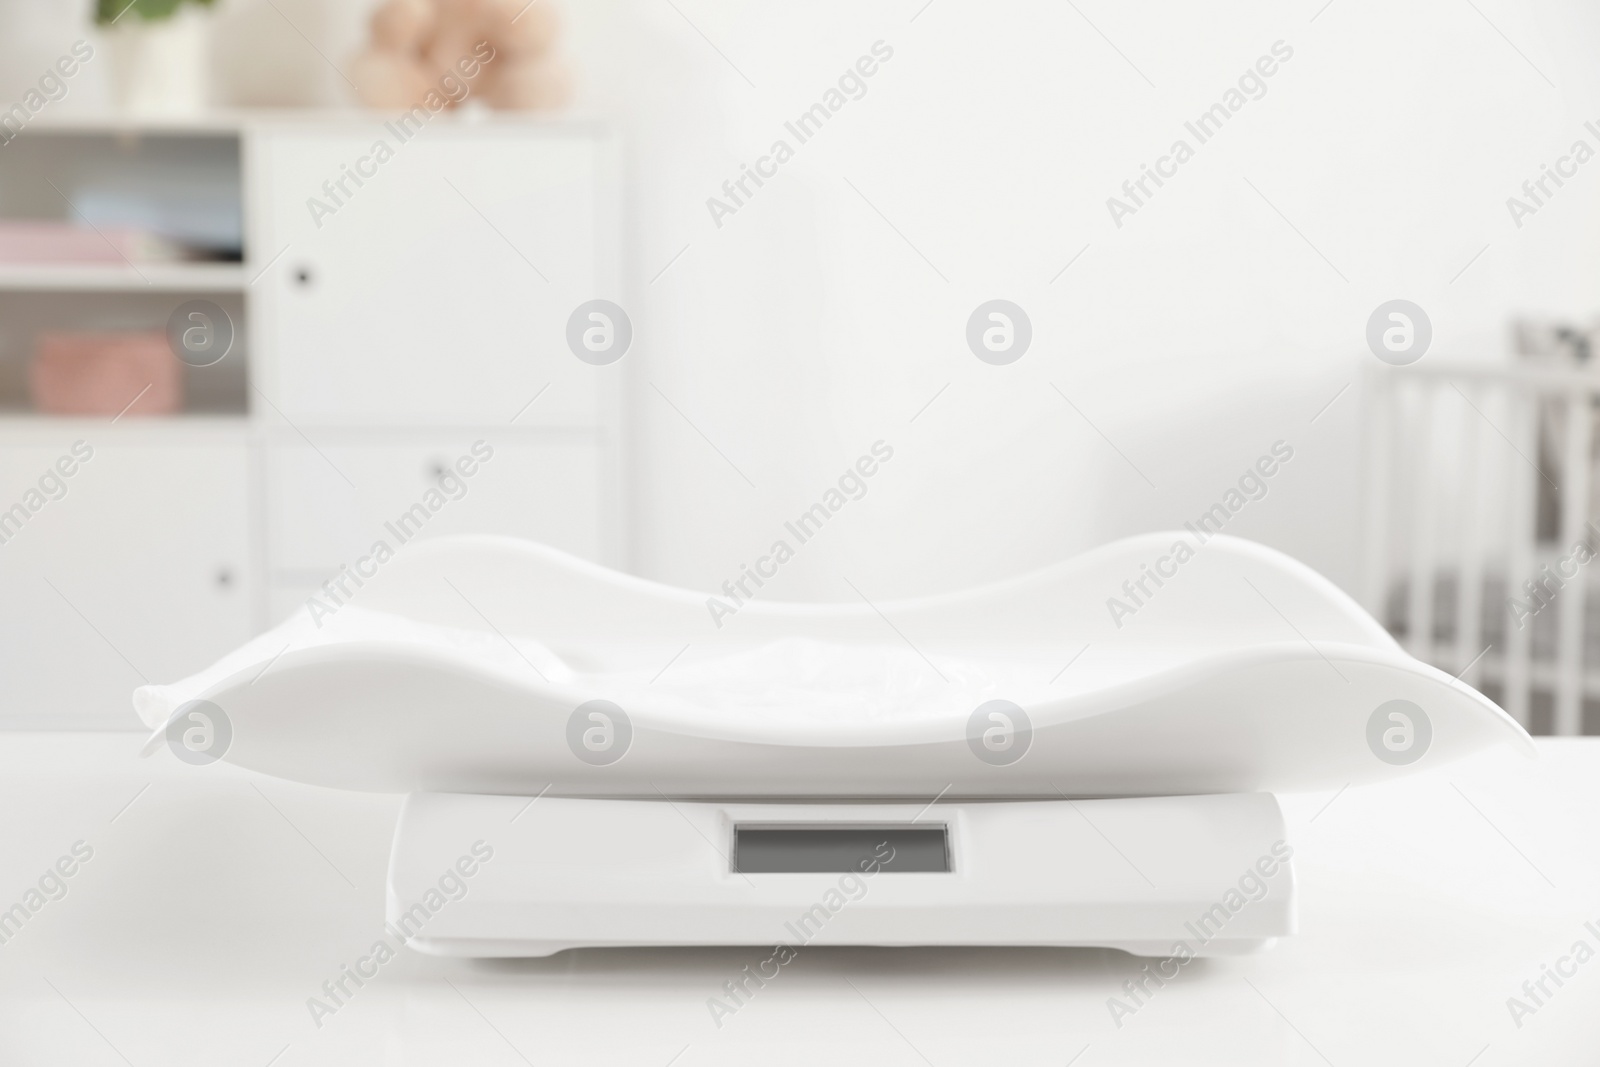 Photo of Modern digital baby scales on table in room. Space for text